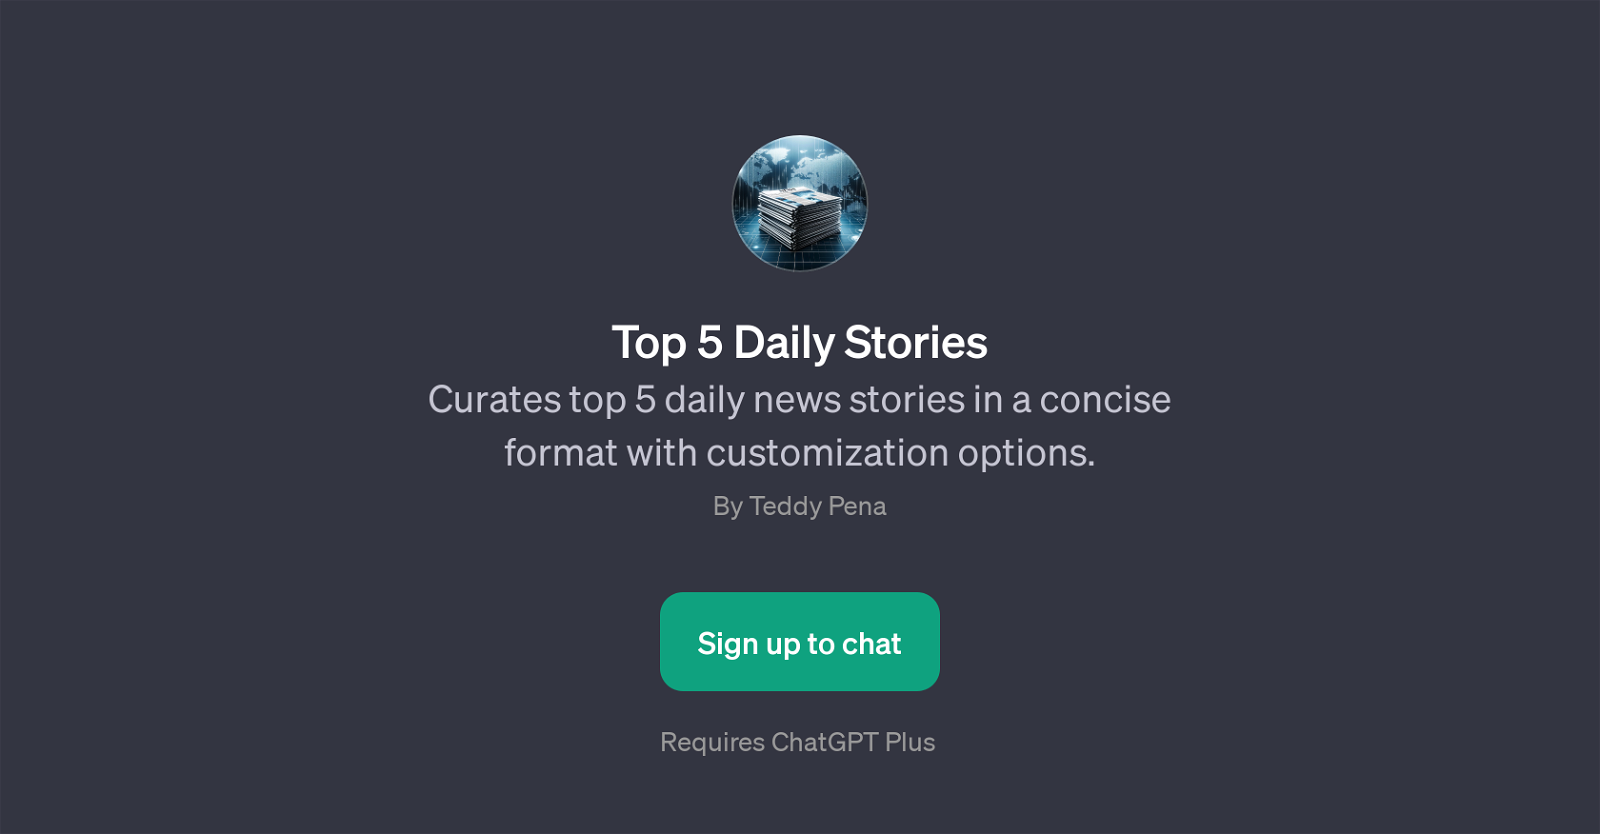 Top 5 Daily Stories website